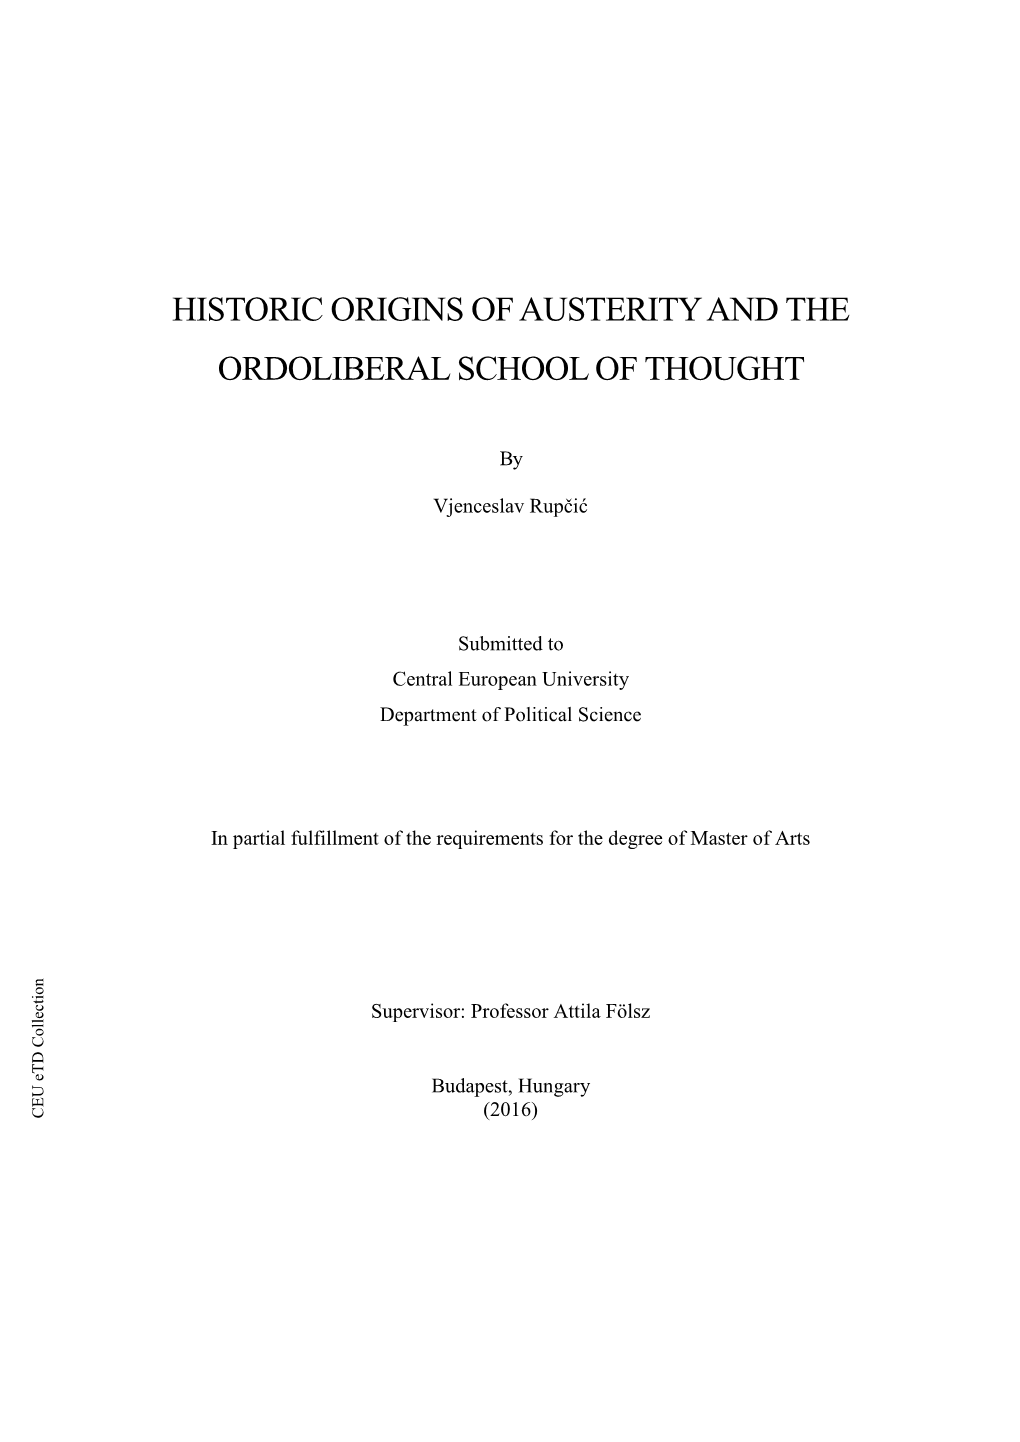 Historic Origins of Austerity and the Ordoliberal School of Thought